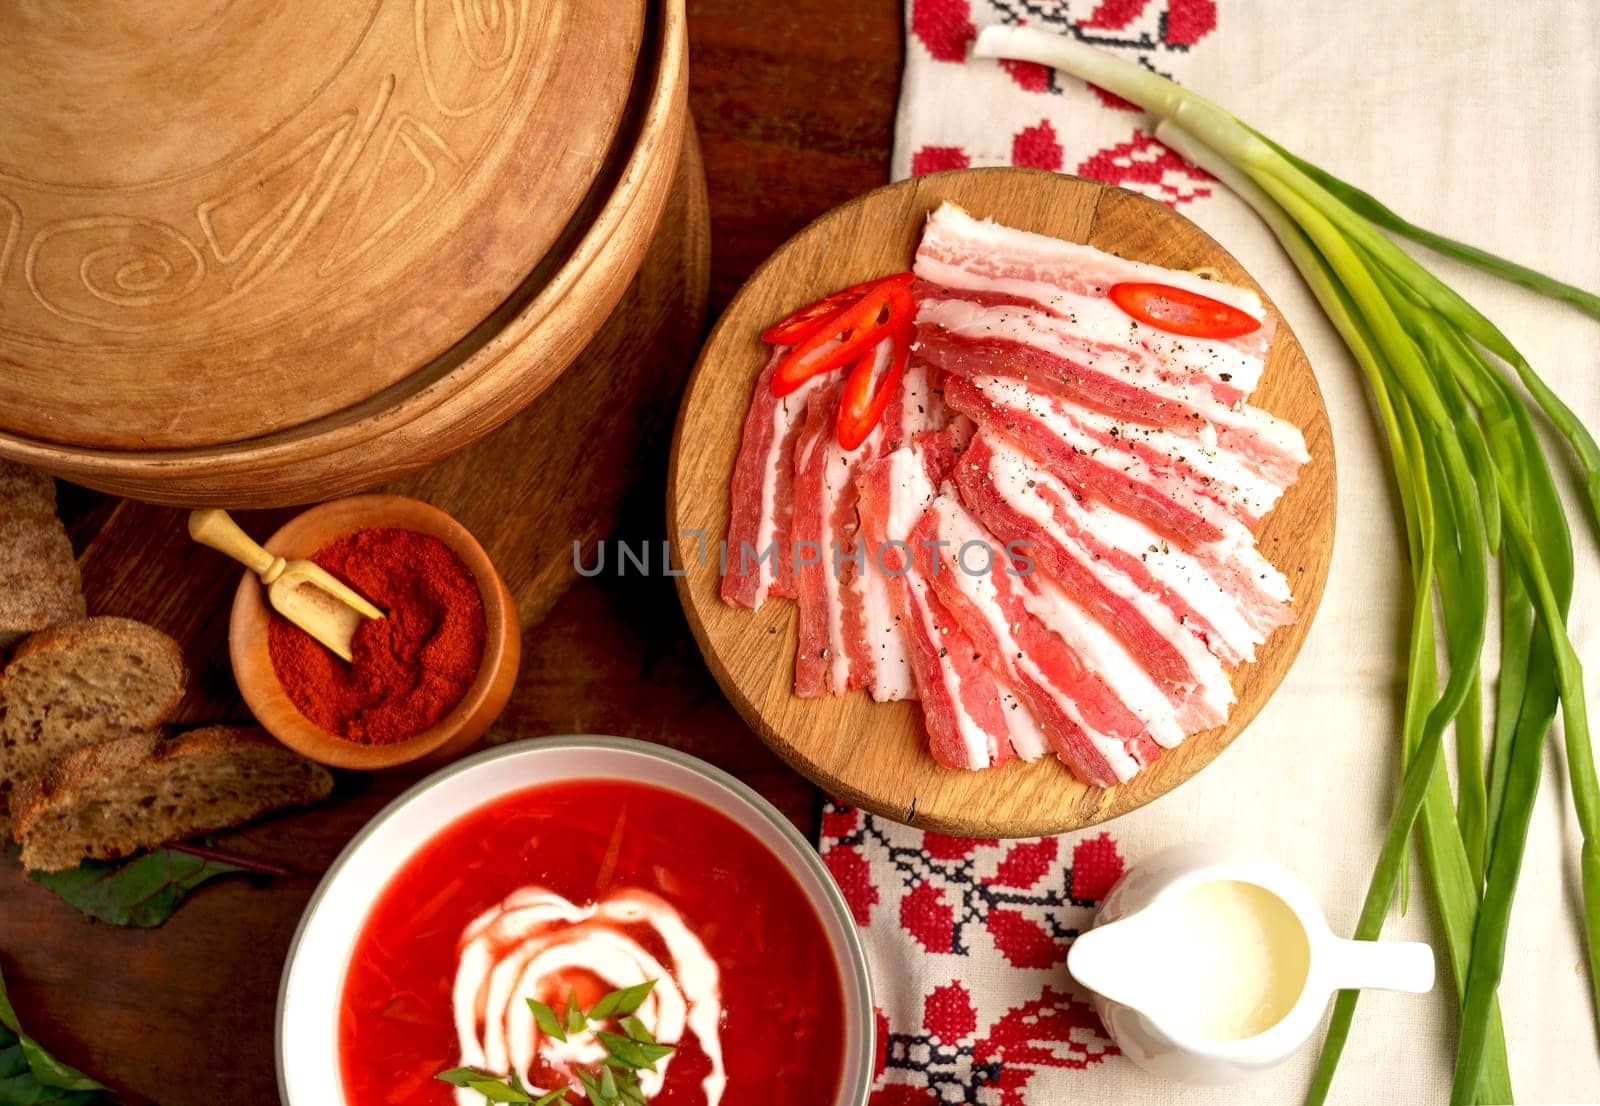 Top view of a wooden tray on a black background on which lies Ukrainian food with spices Traditional Ukrainian borsht, red vegetable soup or borscht with smetana on wooden background. Slavic dish with cabbage, beets, tomatoes Traditional Ukrainian towel along with garlic, bread and salt. Ukrainian rushnyk